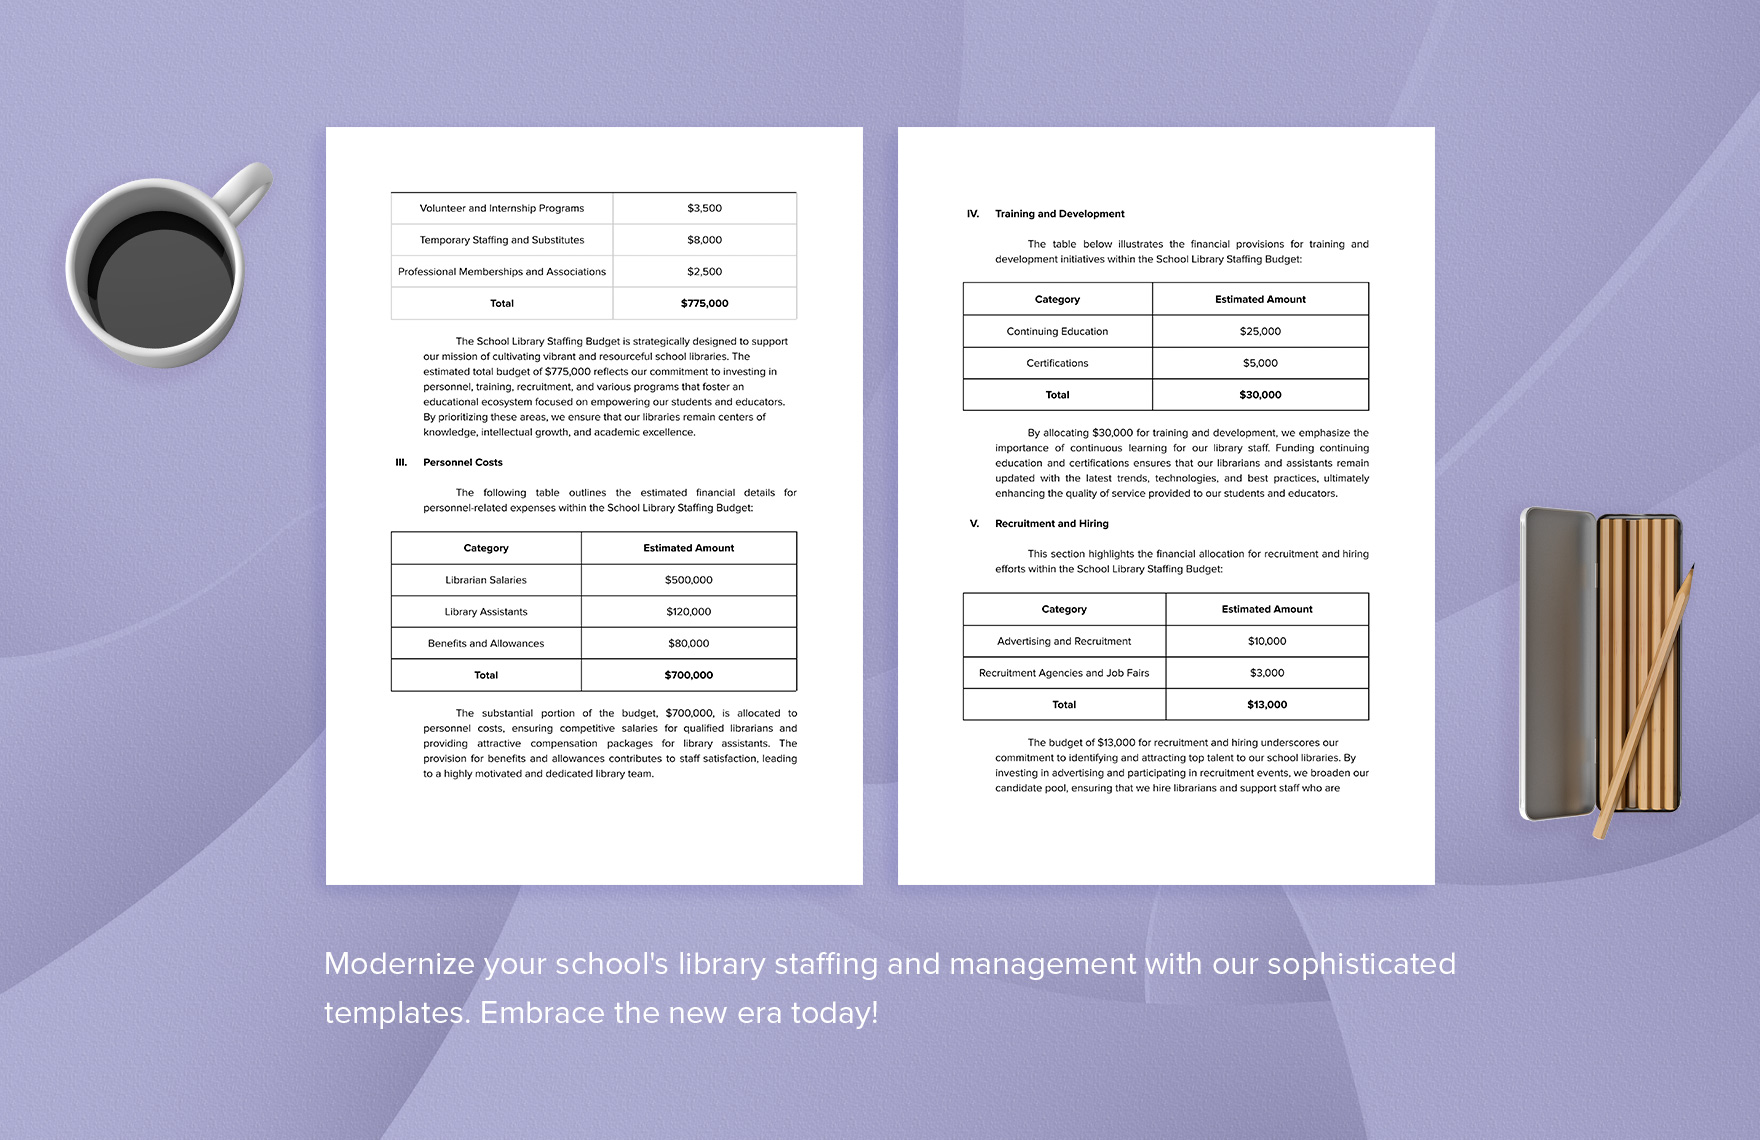 School Library Staffing Budget Template